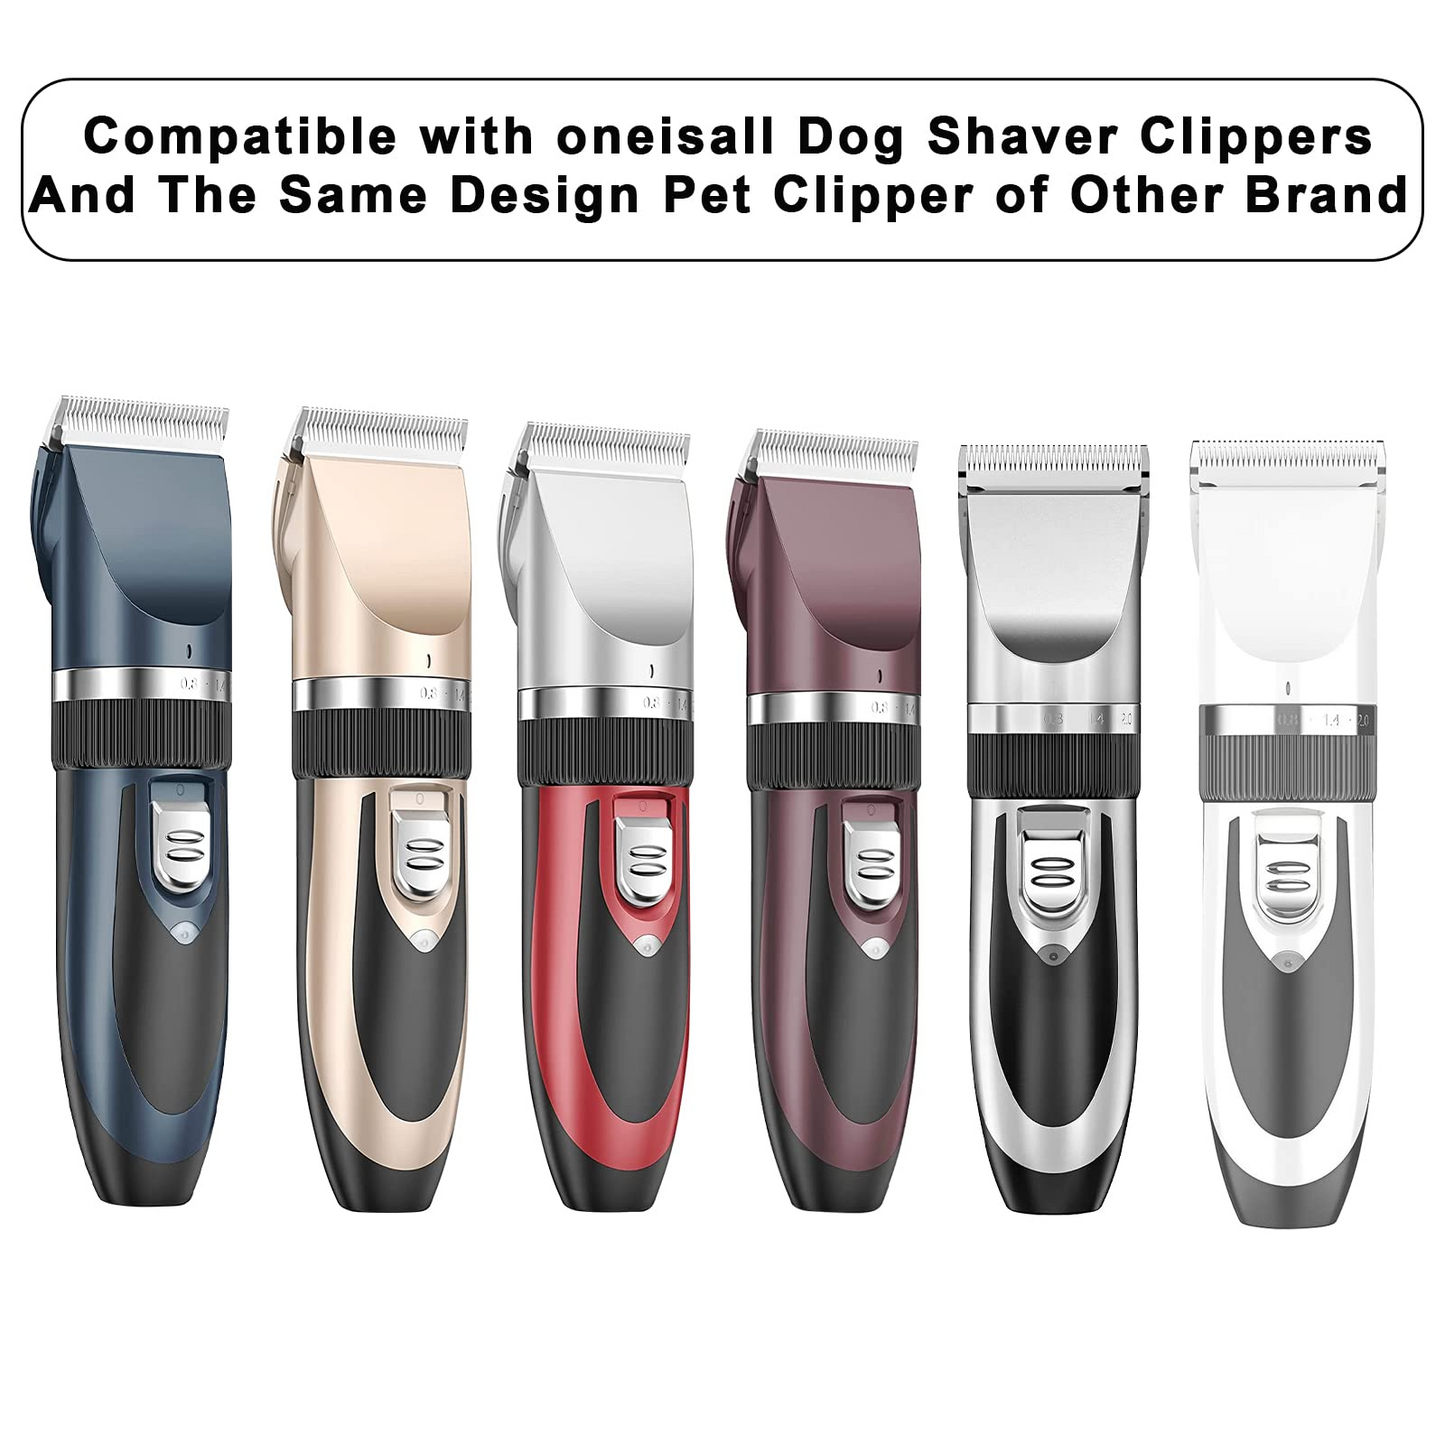 Audoc Dog Grooming Clipper Replacement Blades Compatible with ONEISALL Pet Clippers，Low Noise Dog Clipper，Made of Stainless Steel Pet Clipper Blade